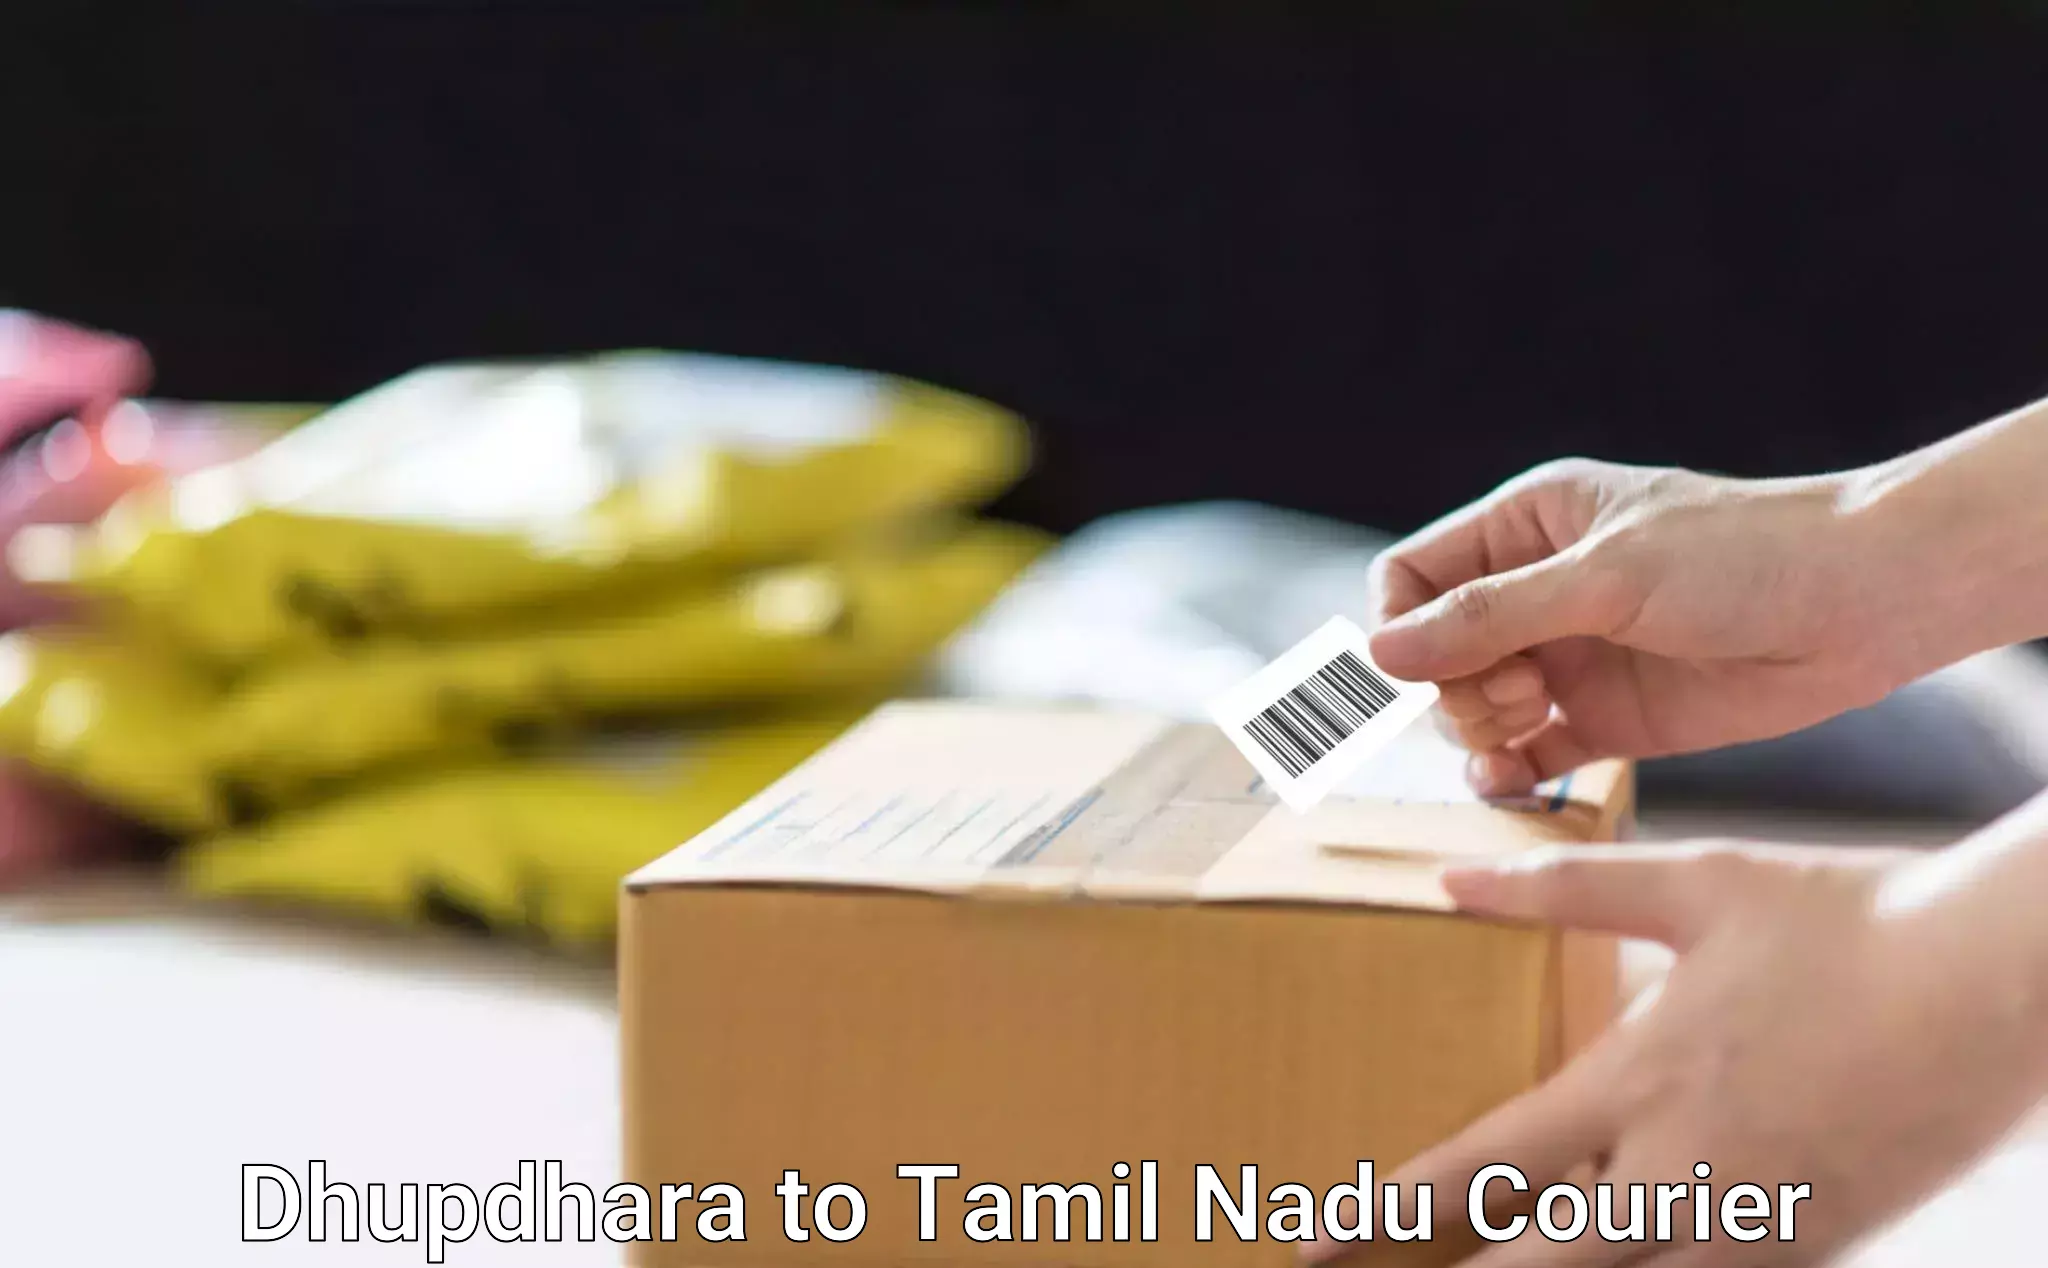 Innovative courier solutions Dhupdhara to Tamil Nadu